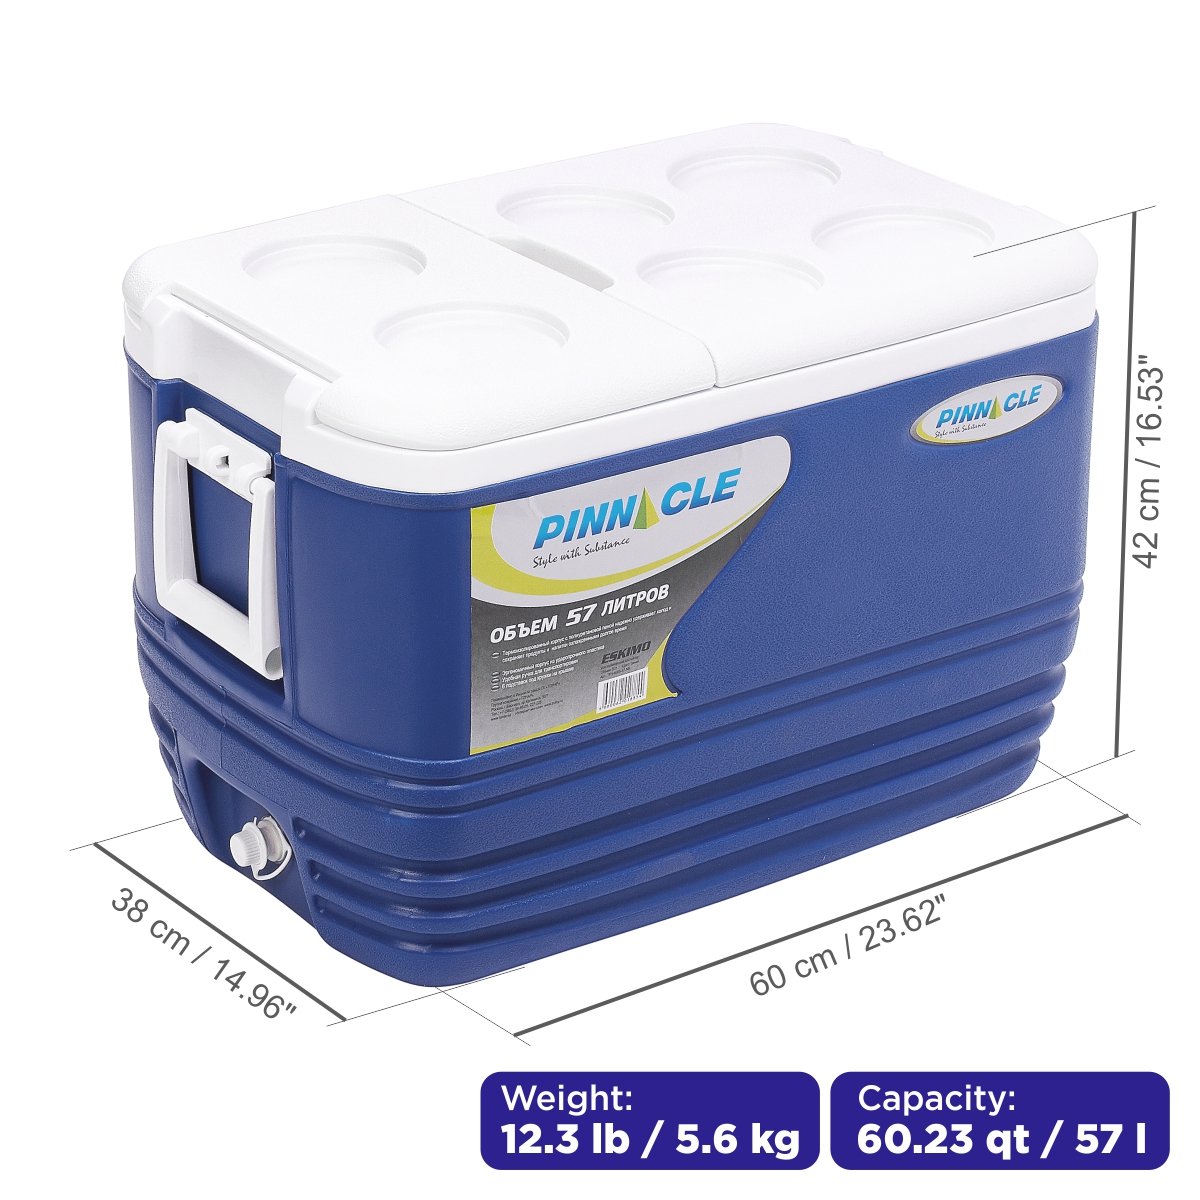 Eskimo Large Ice Chest with Side Handle, Drain Plug and 6 Cup Holders, 60 qt is 23.6 inches long, 15 inches wide and 16.5 inches high, weighing 12.3 lbs